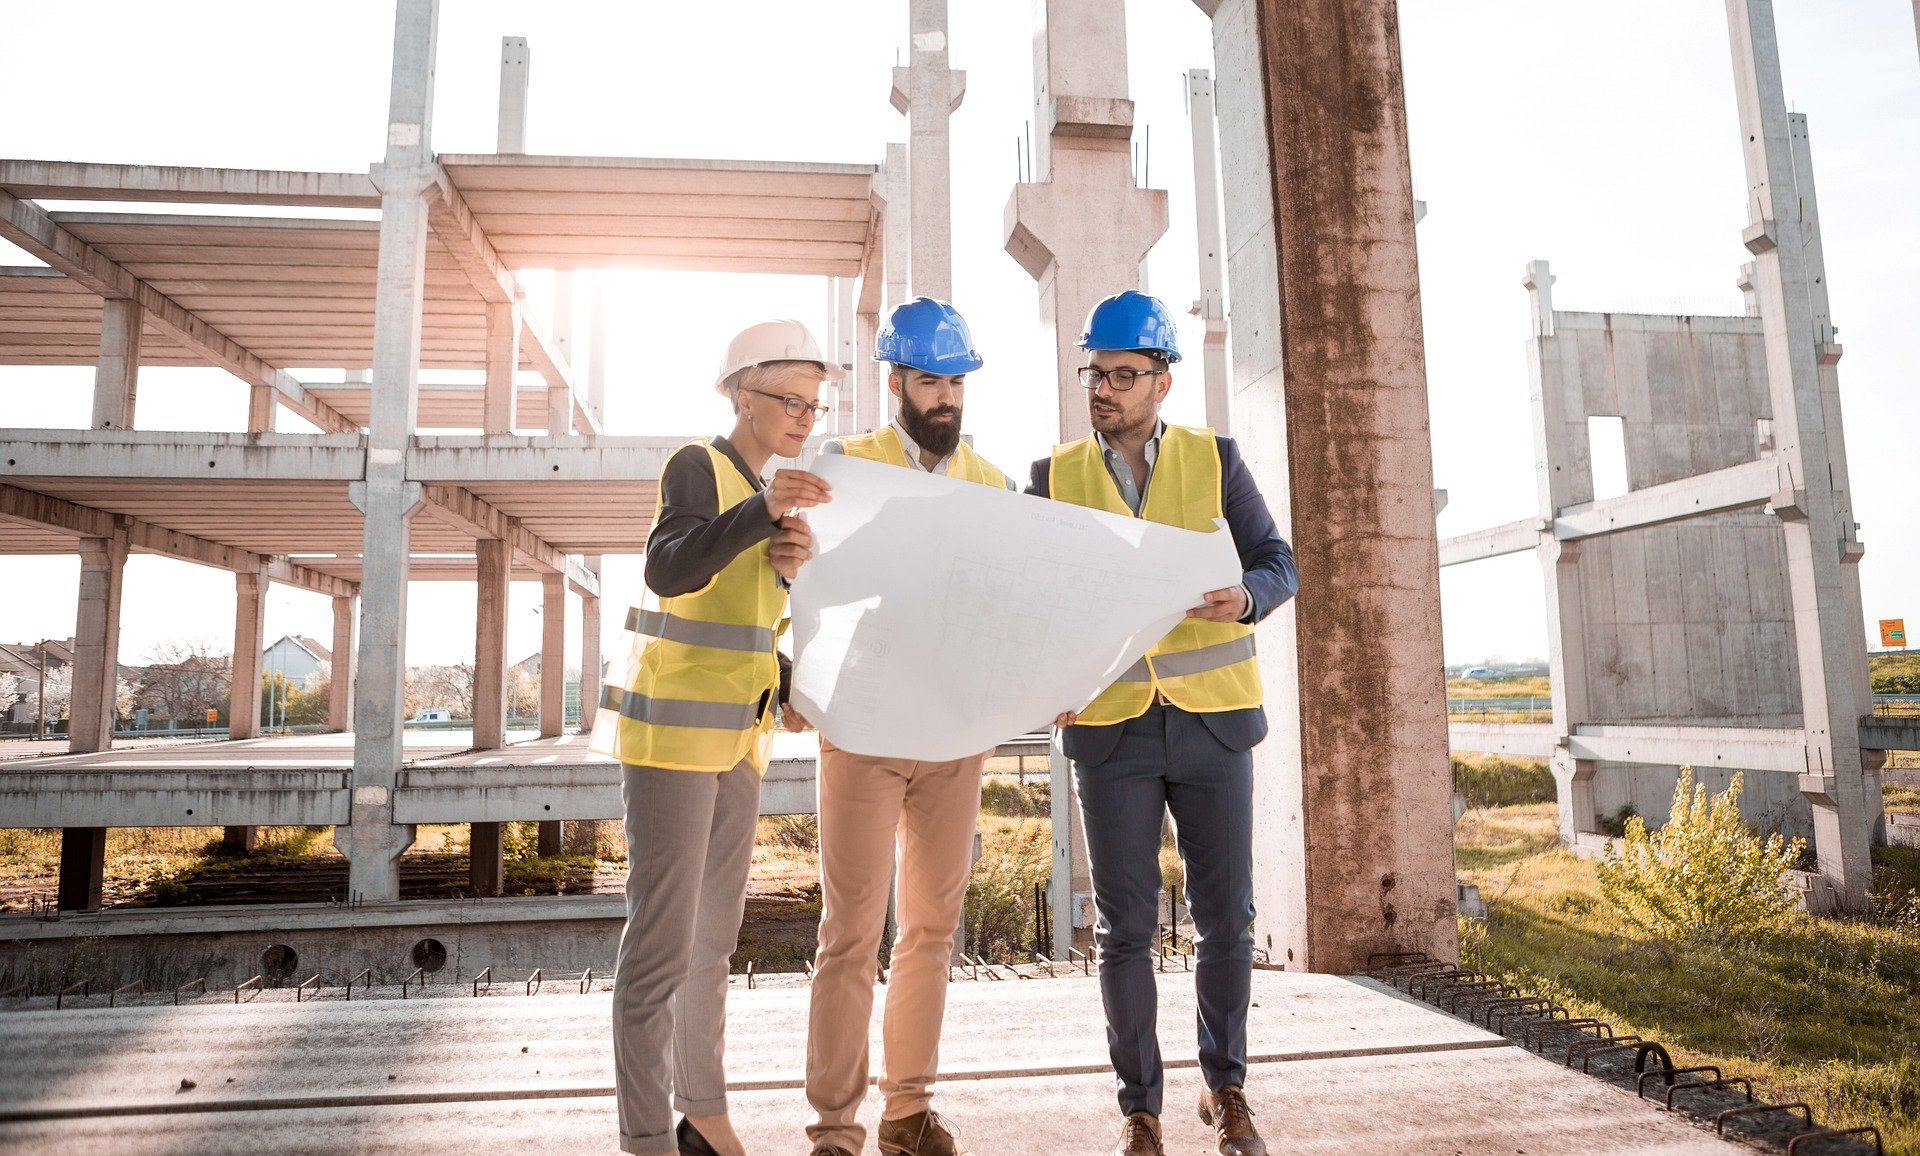 25 Best Master’s in Construction Management for 2021